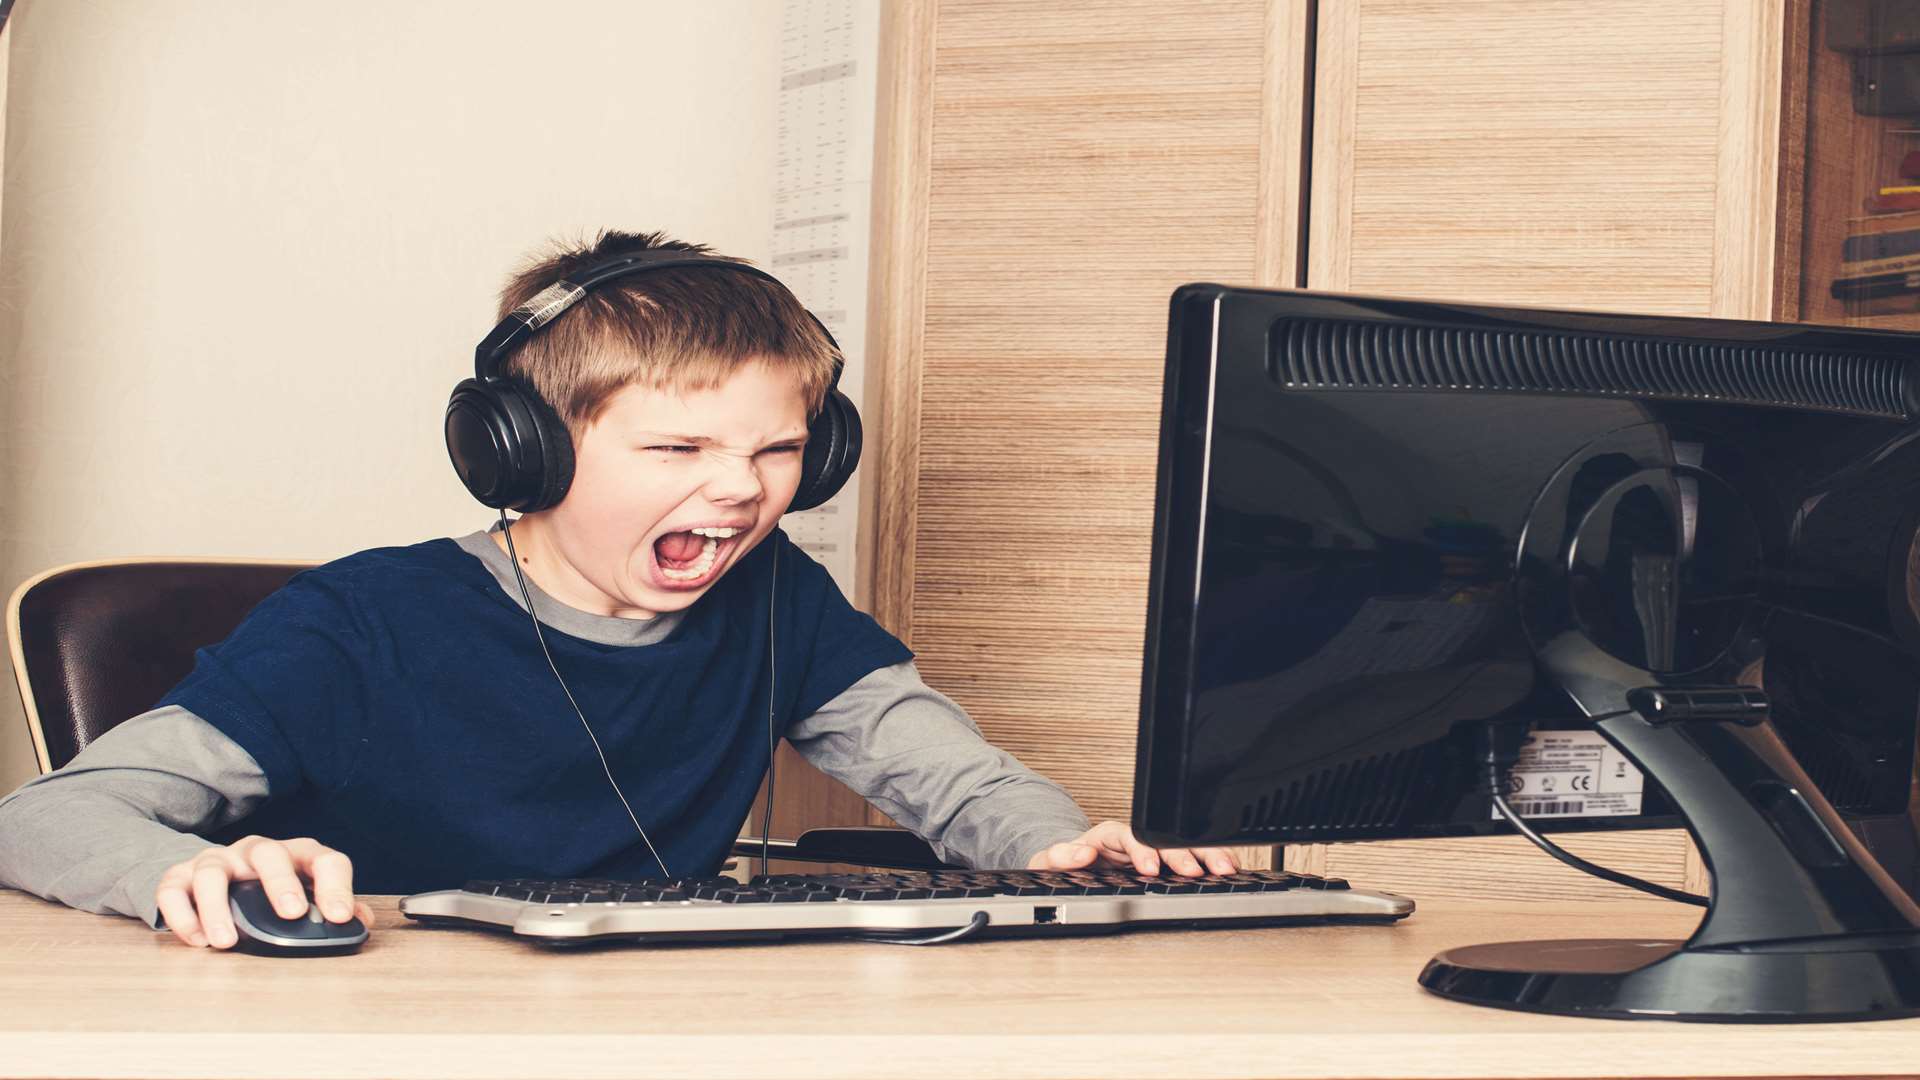 Hours online means children are spending less time with other kids and not learning to share